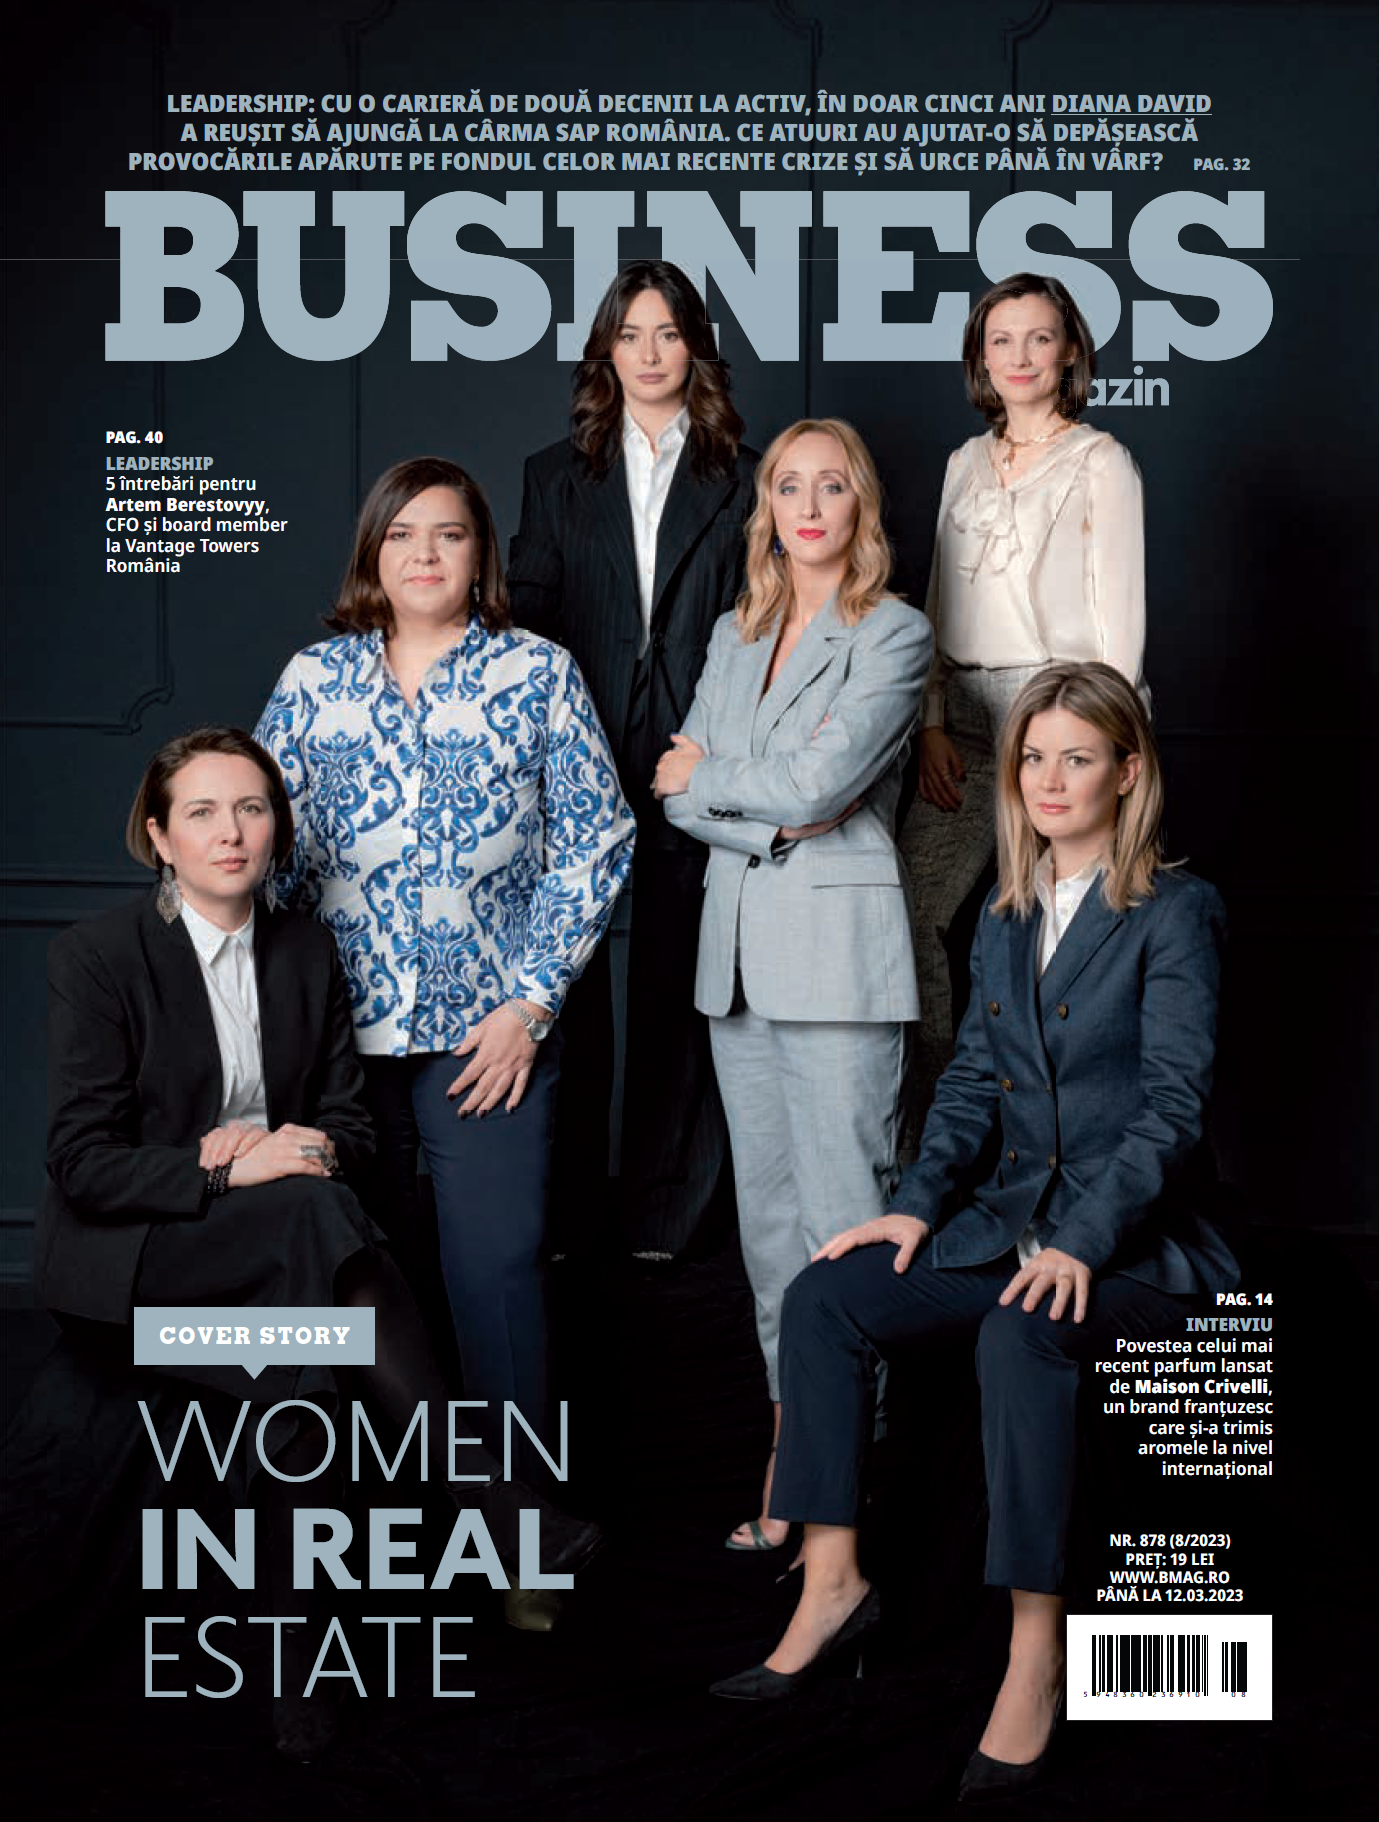 Women in Real Estate: Brindusa Grama, on the cover of Business Magazin